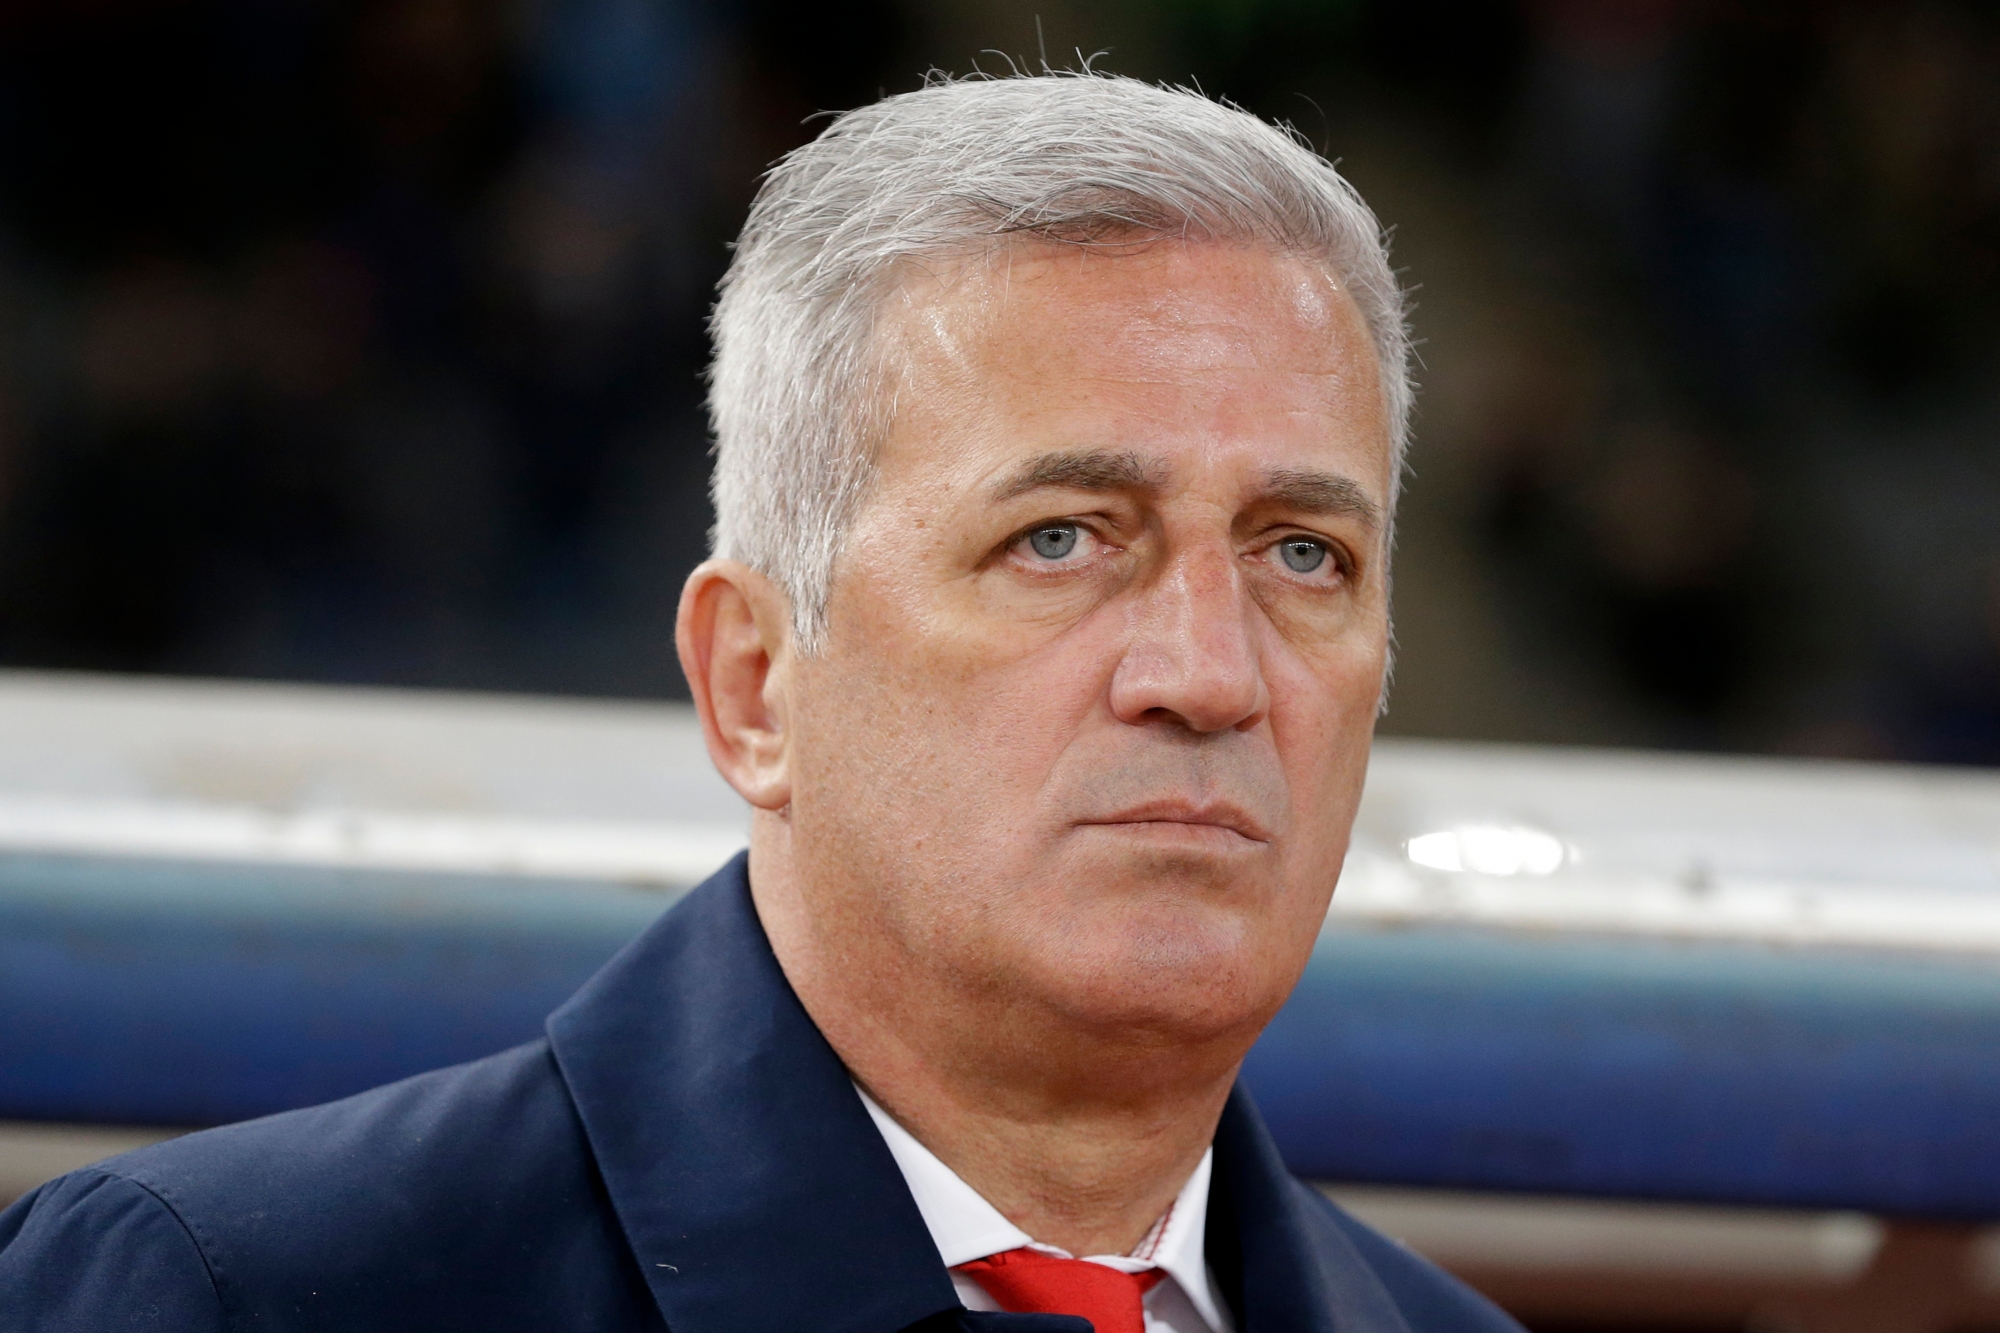 In this photo taken on Friday, March 23, 2018, Switzerland coach Vladimir Petkovic stands for the national anthem of his team before an international friendly soccer match against Greece at the Olympic stadium in Athens. (AP Photo/Thanassis Stavrakis)